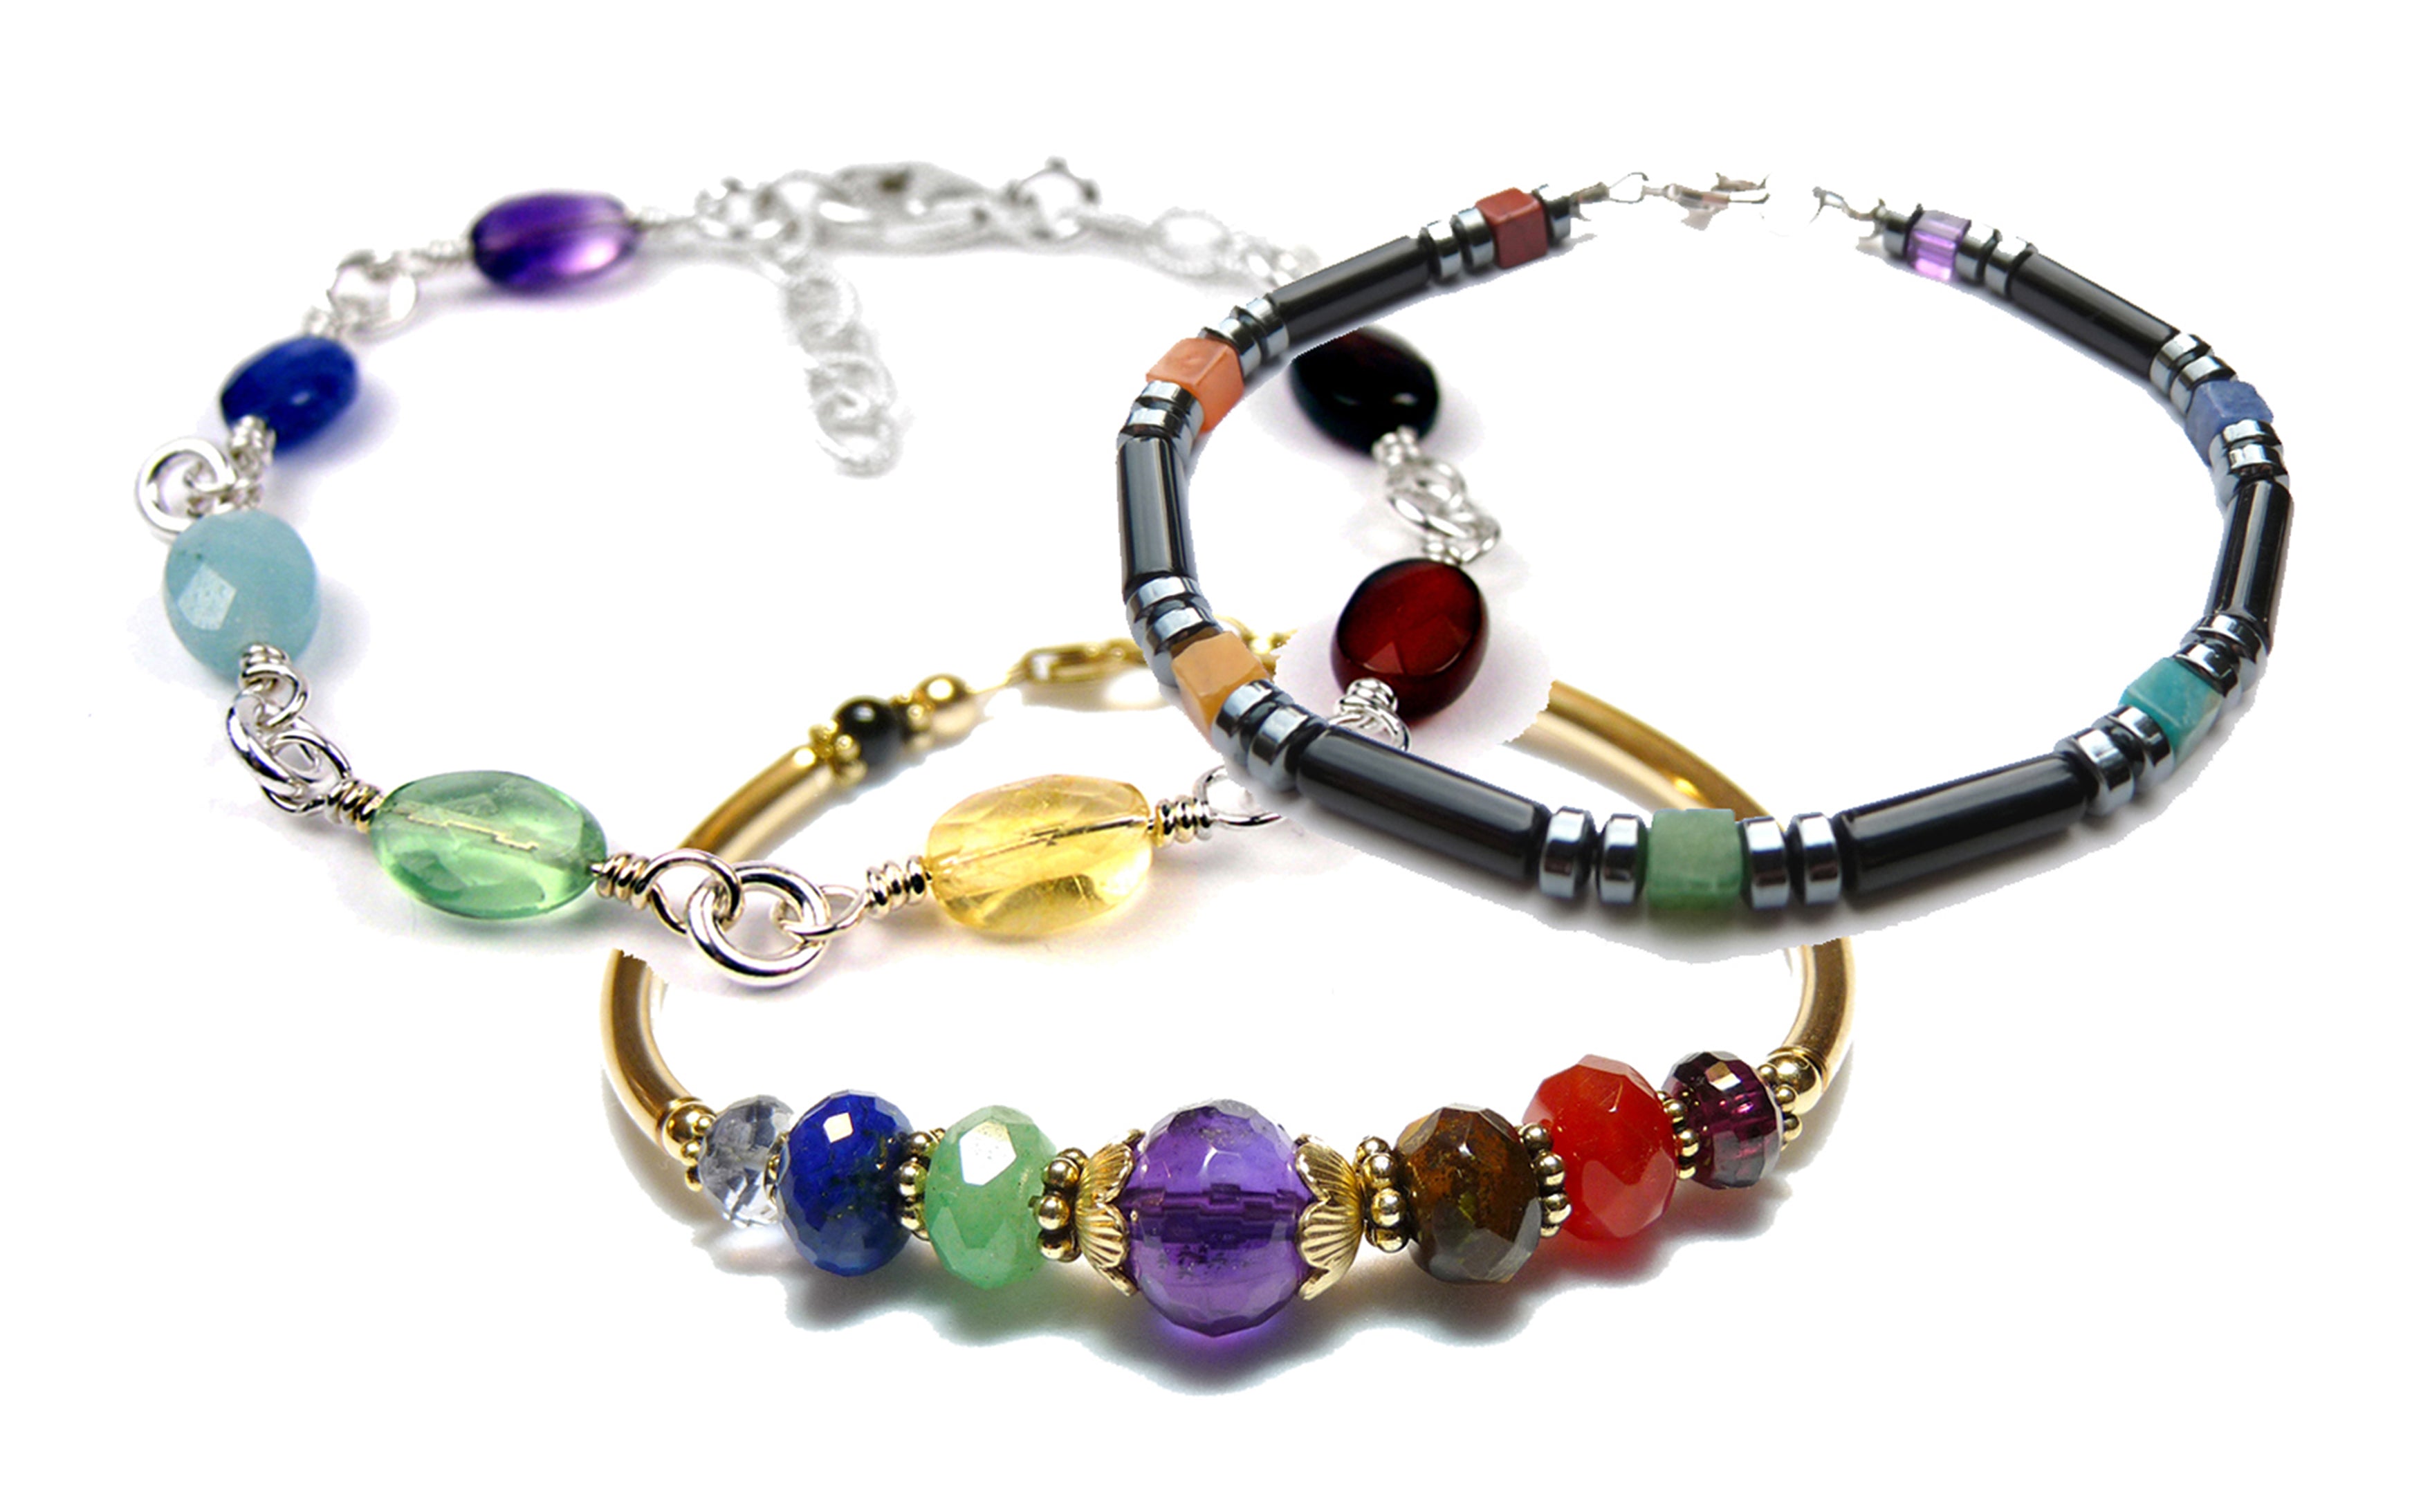 Authentic Handmade 7 Chakra Bracelets with Healing Crystals